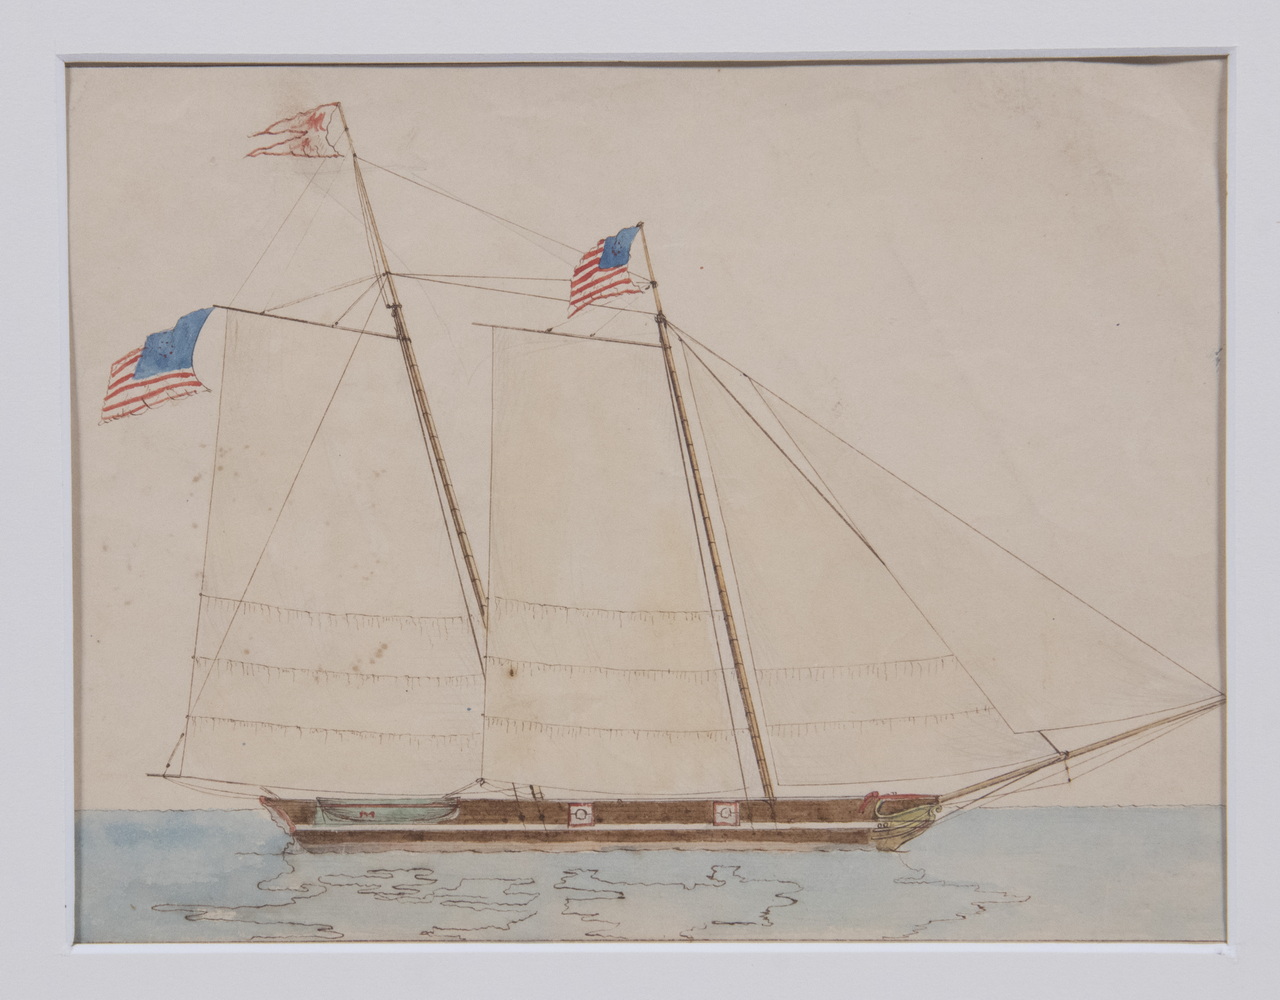 SAILOR MADE DRAWING OF A BOAT  302926